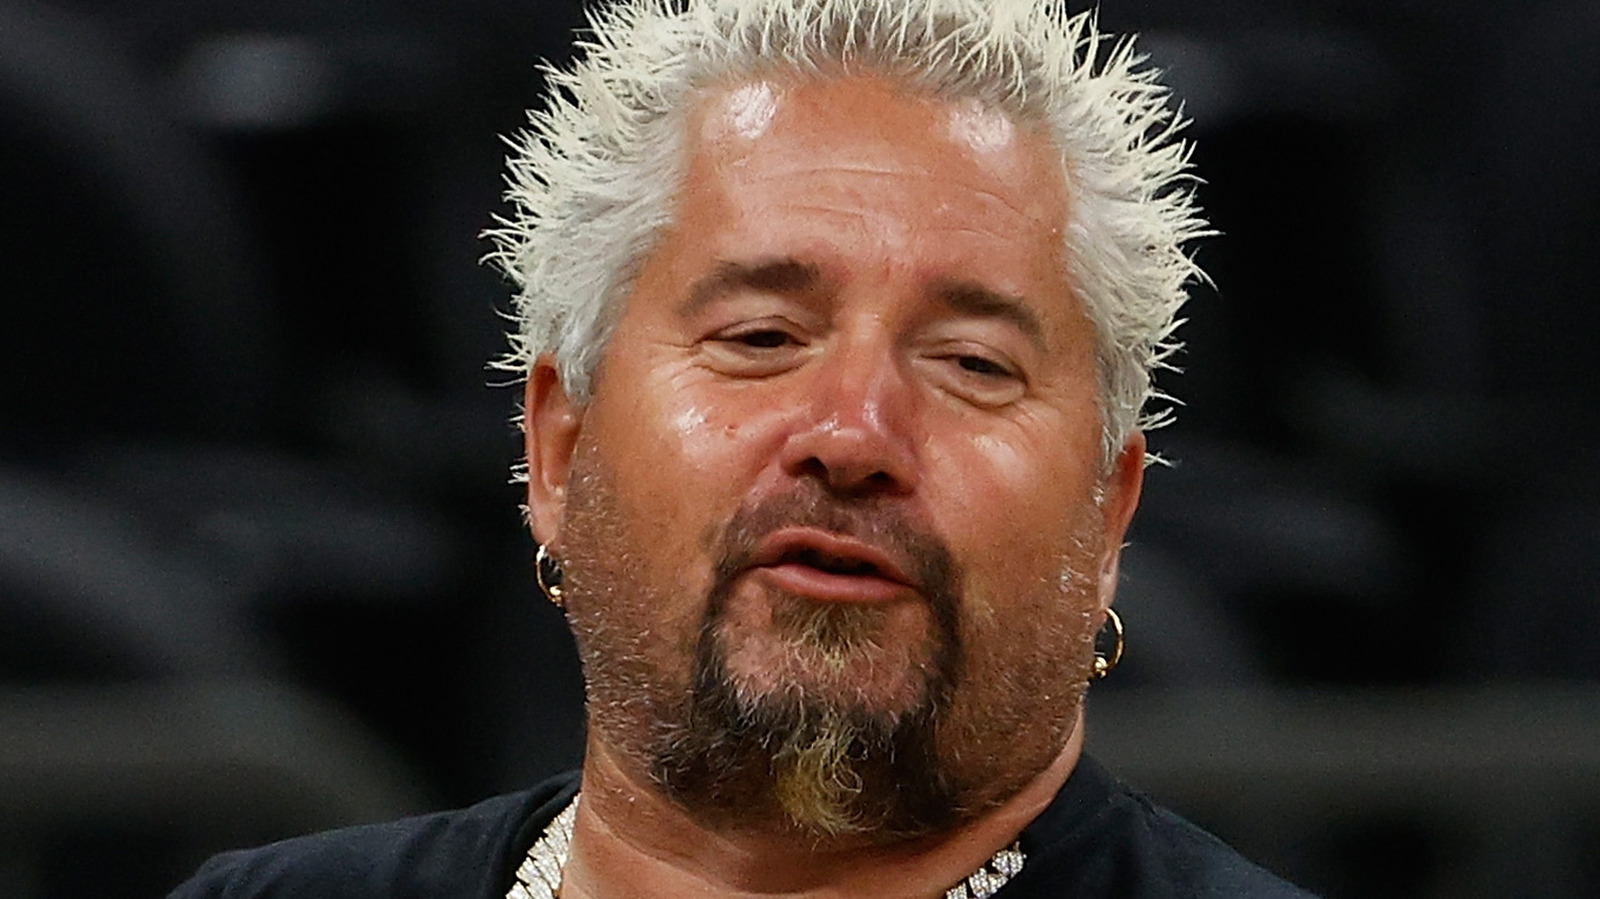 The Beautiful Reason Guy Fieri Was Brought To Tears Before Getting This Special New Tattoo